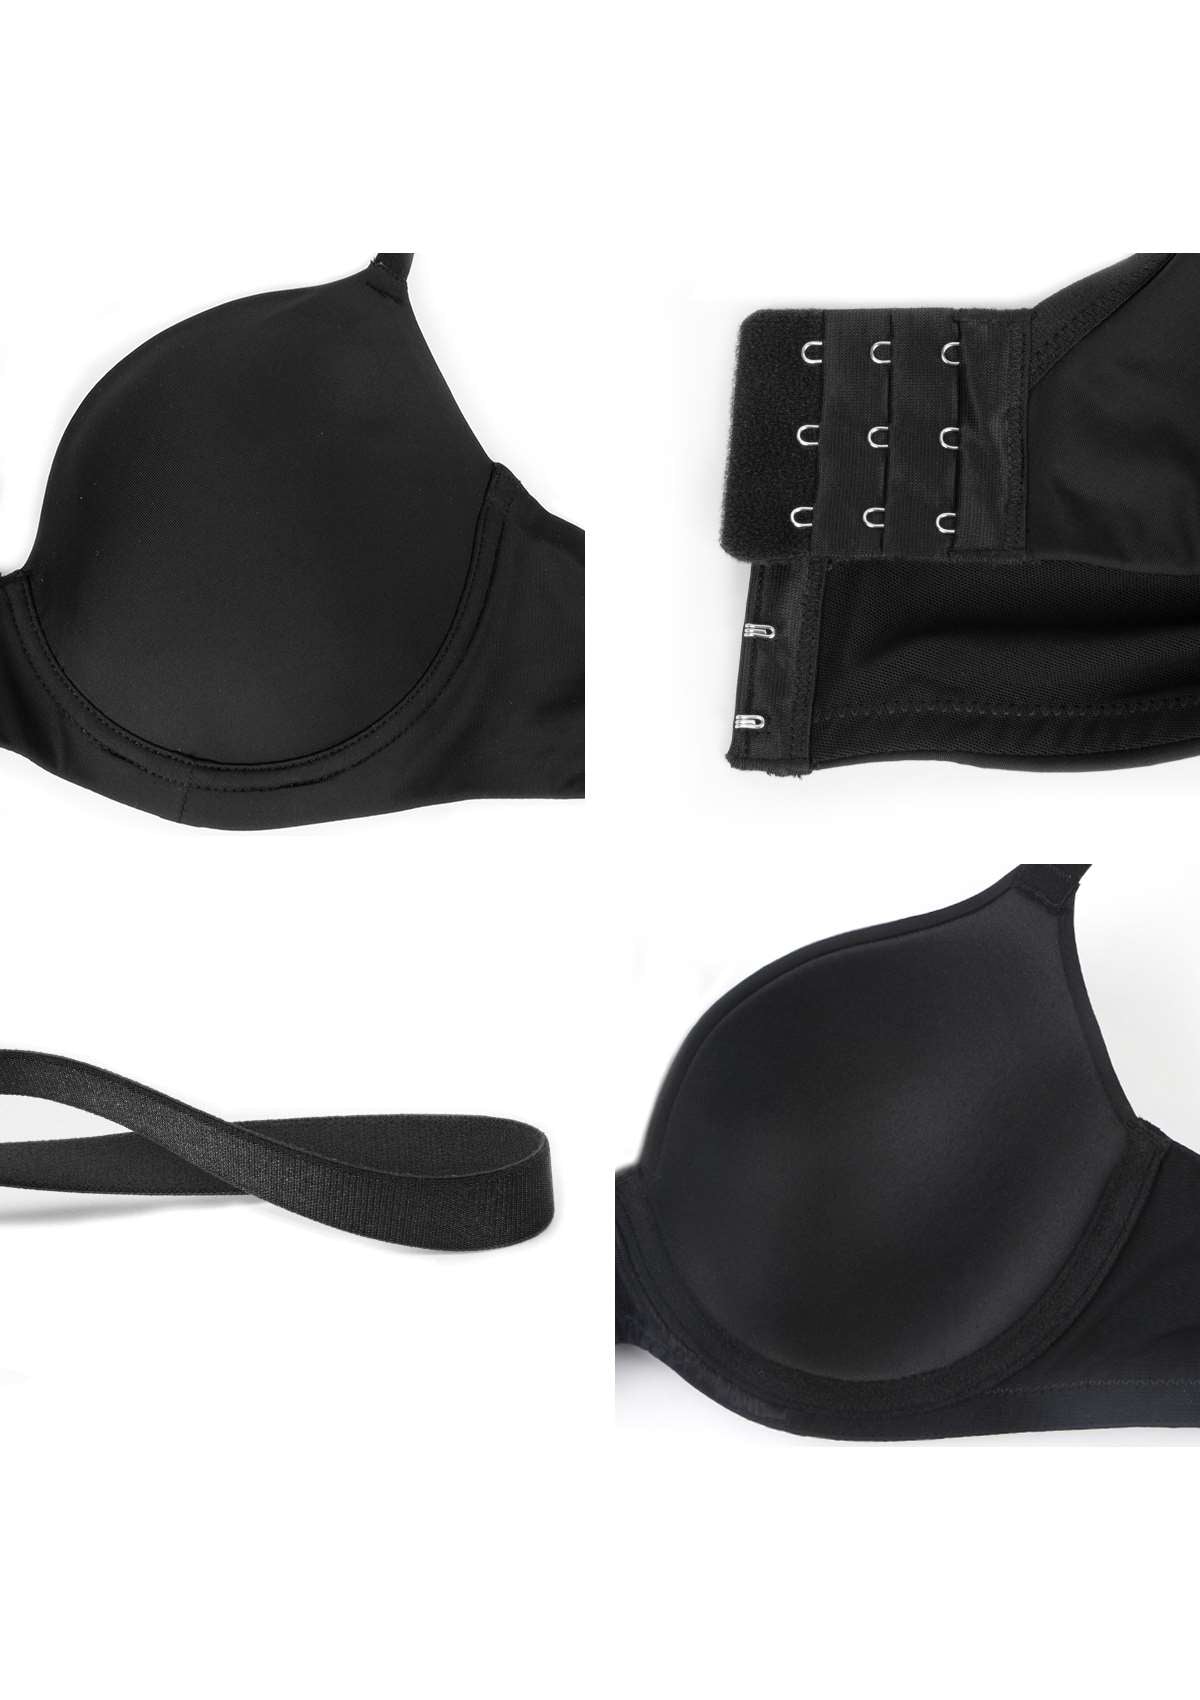 HSIA Gemma Smooth Padded T-shirt Everyday Bras - For Lift And Comfort - Black / 34 / DDD/F